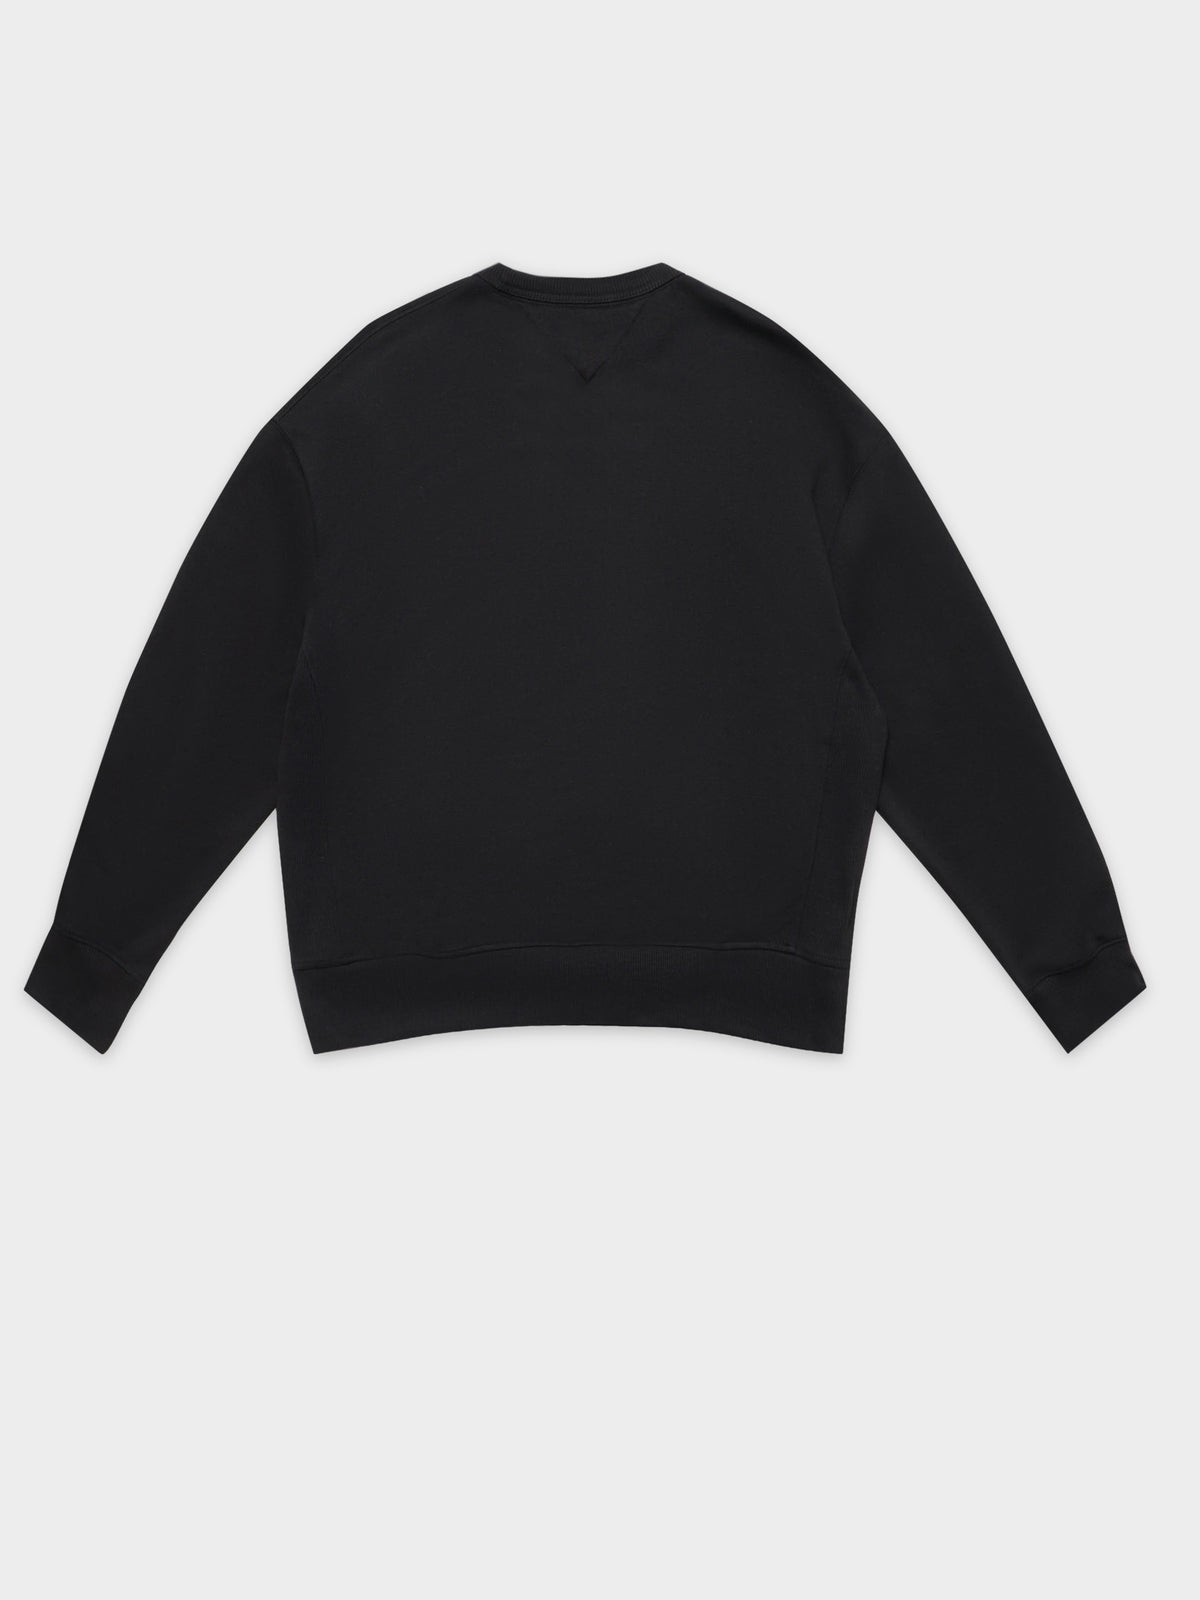 Tiny Tommy Crew Sweater in Black